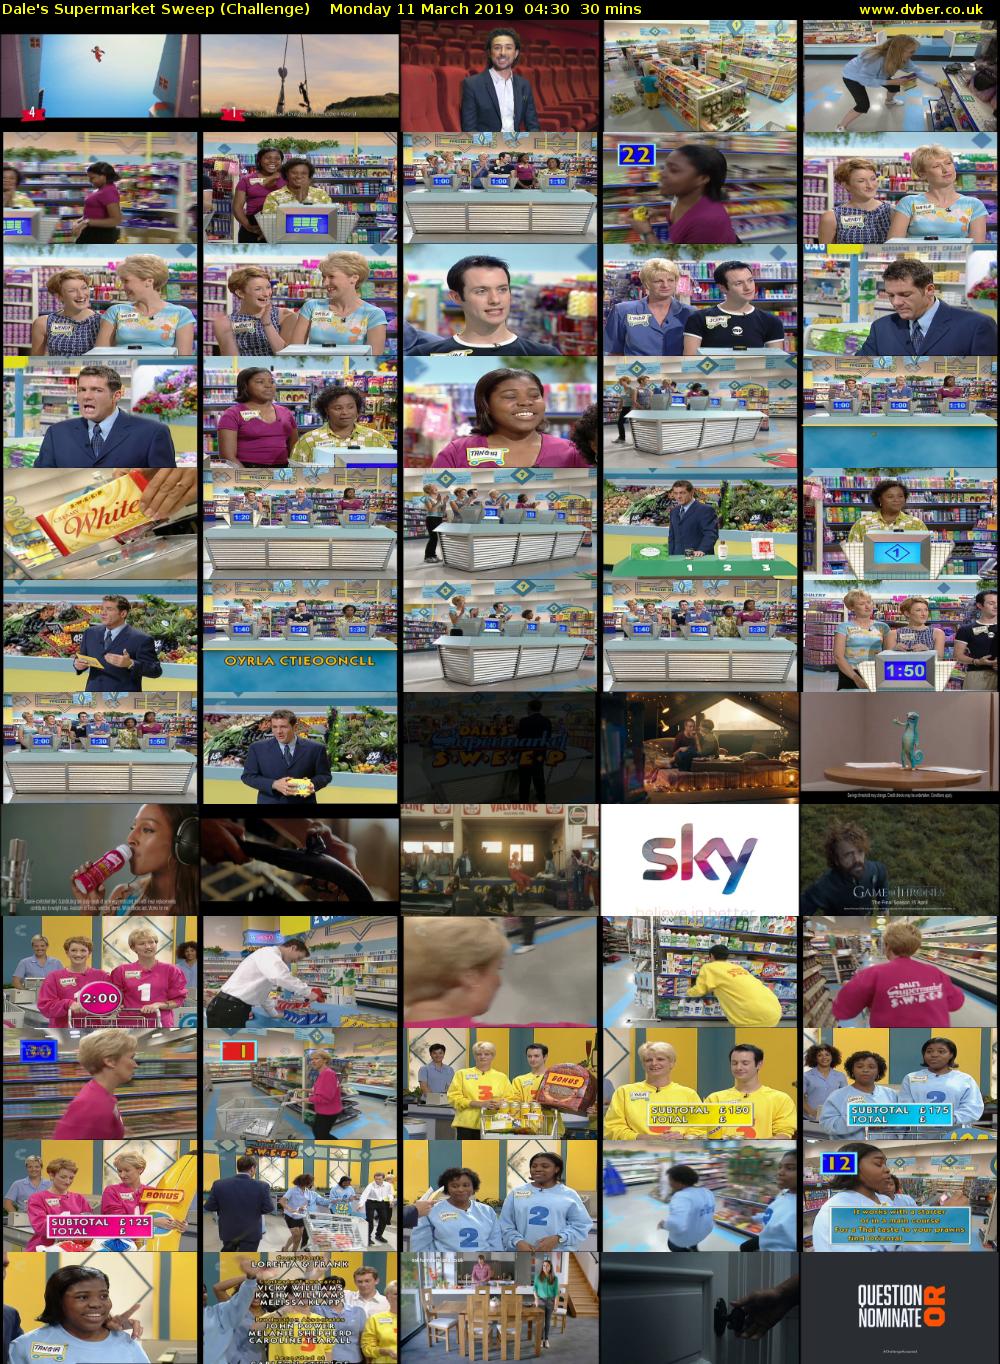 Dale's Supermarket Sweep (Challenge) Monday 11 March 2019 04:30 - 05:00